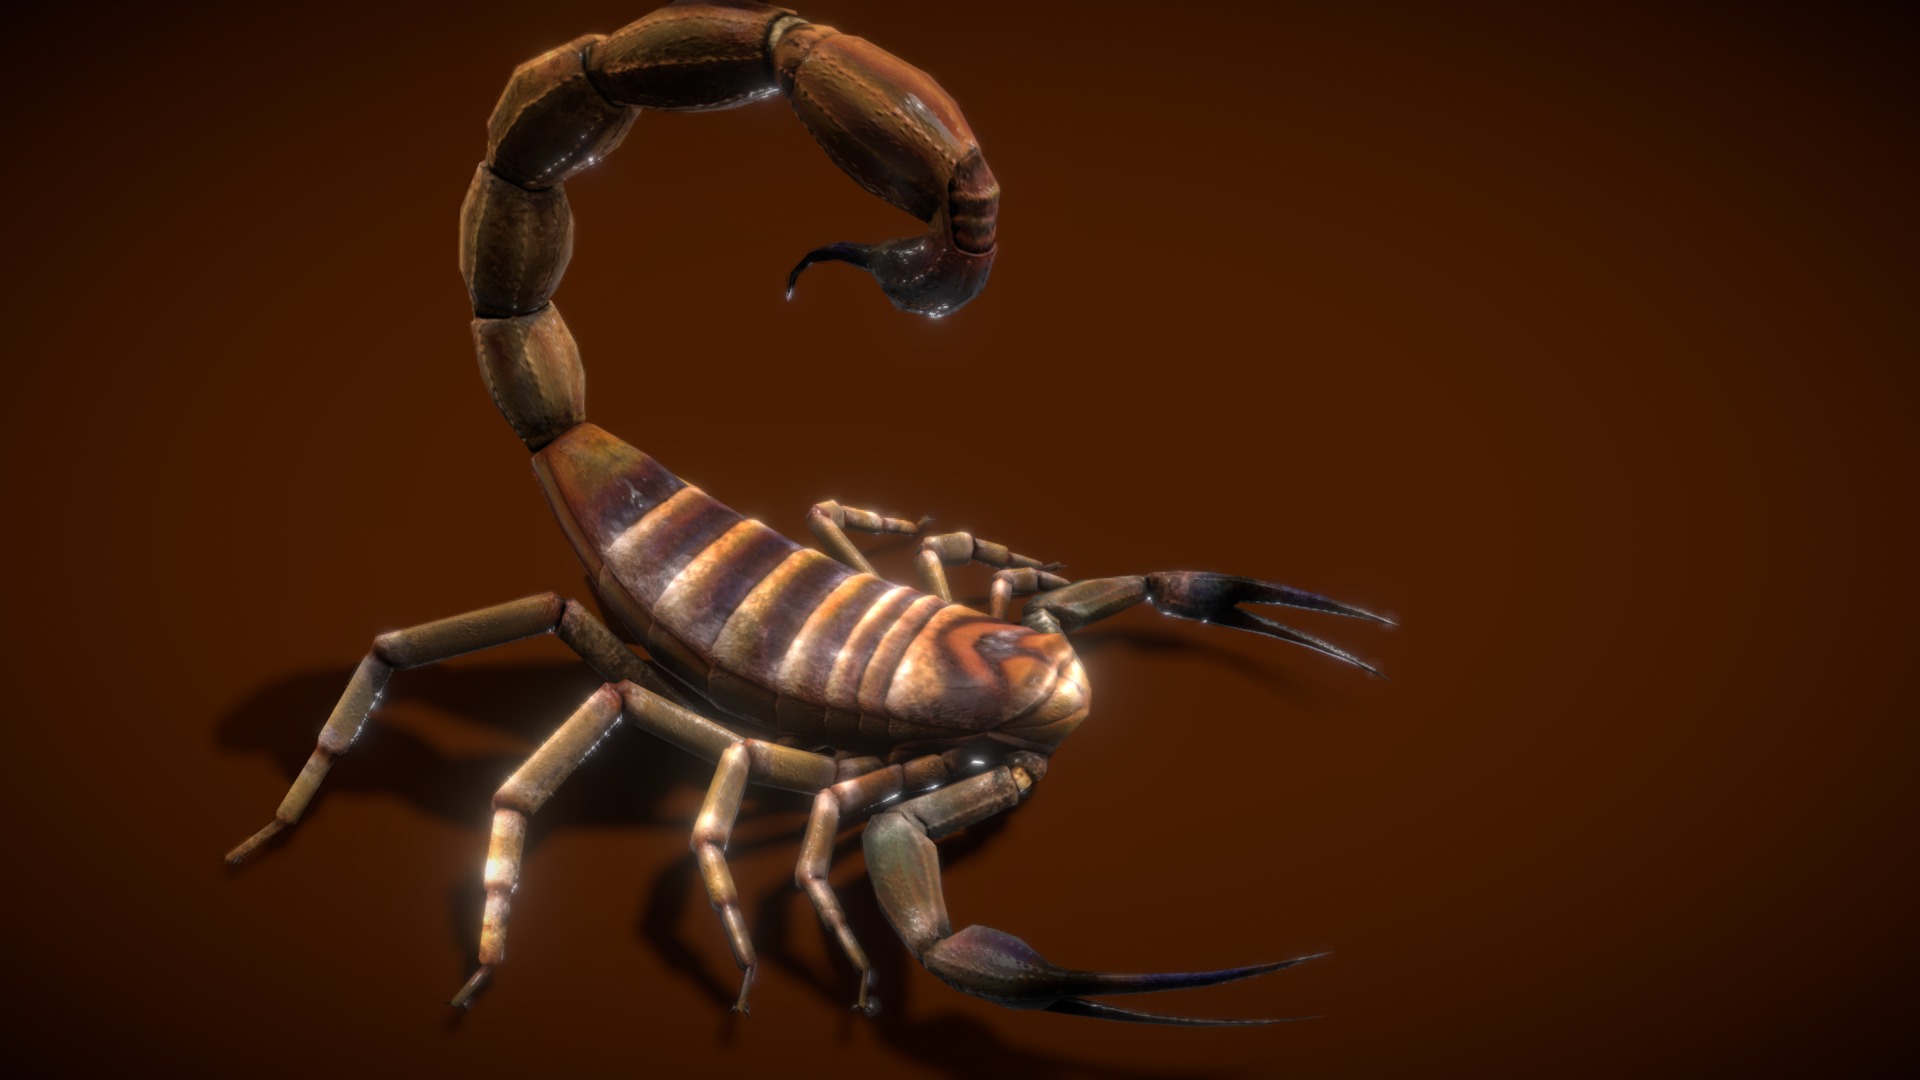 3D model Scorpion Lowpoly 3D - This is a 3D model of the Scorpion Lowpoly 3D. The 3D model is about a close up of a bug.